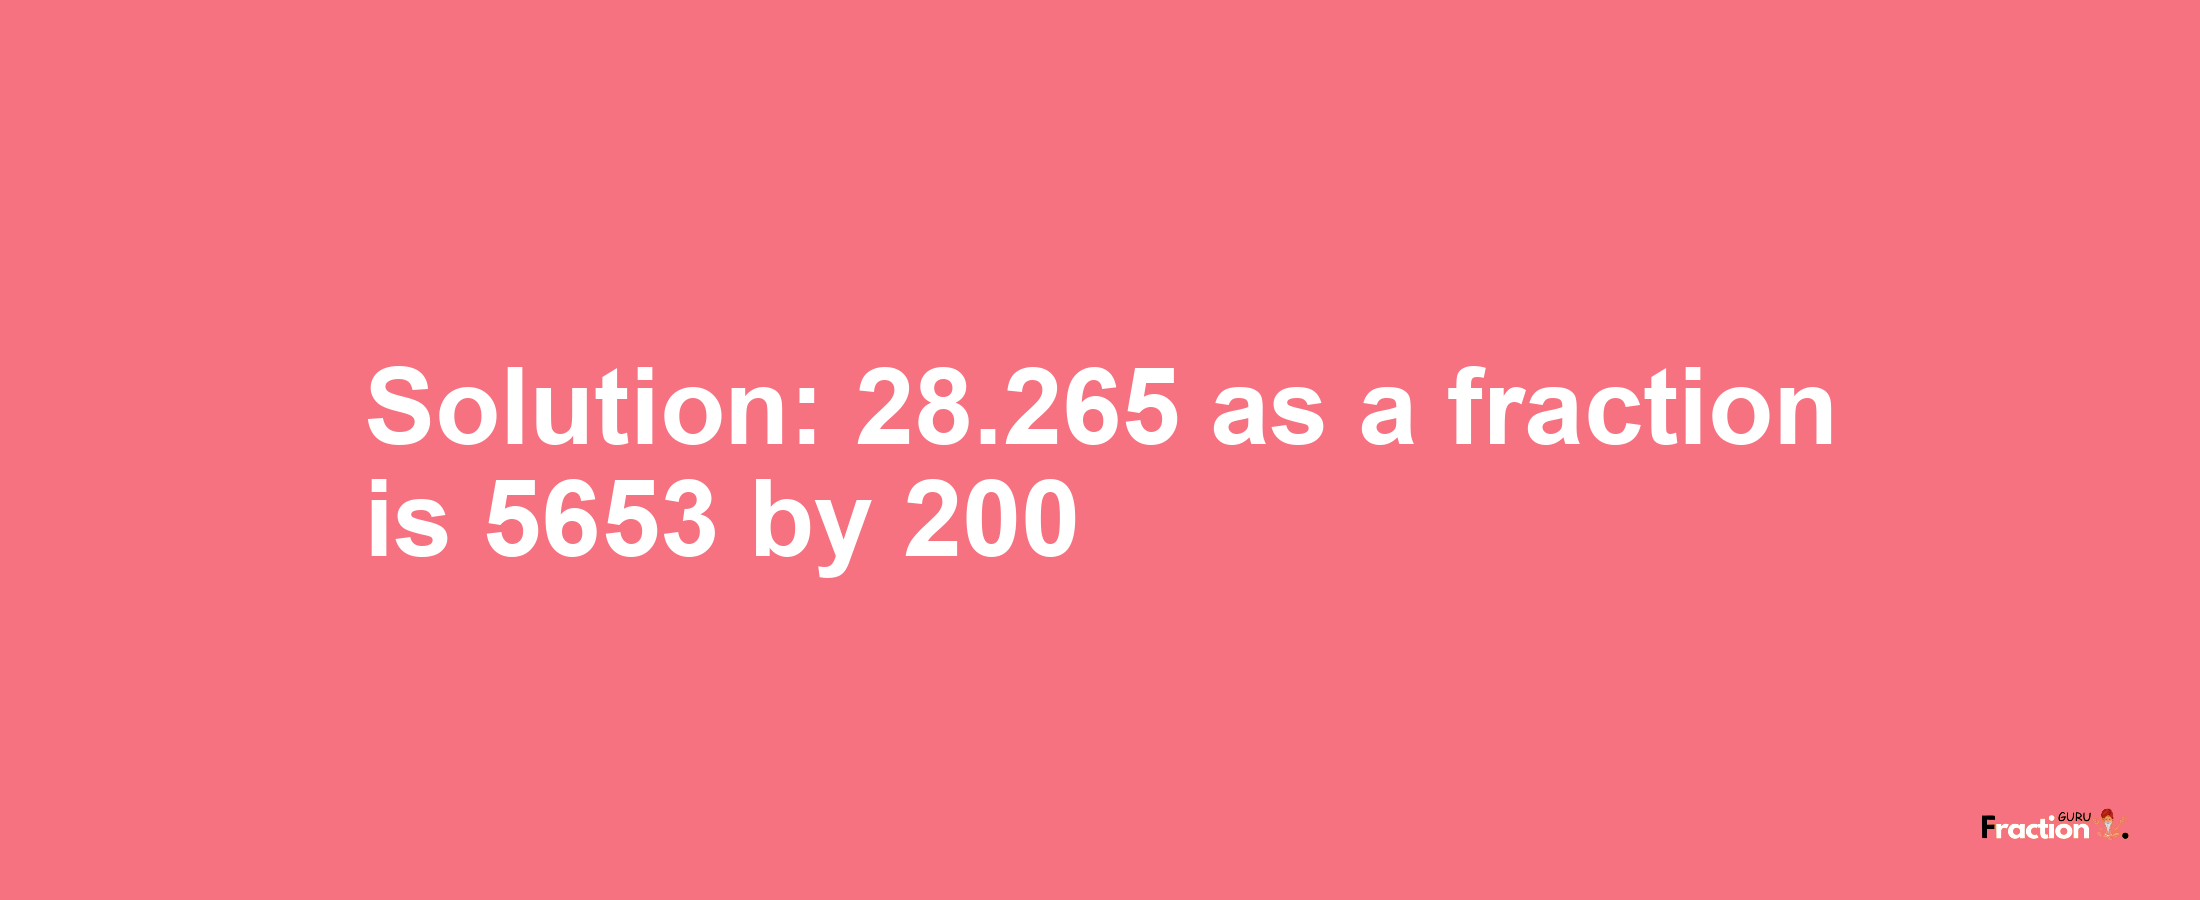 Solution:28.265 as a fraction is 5653/200